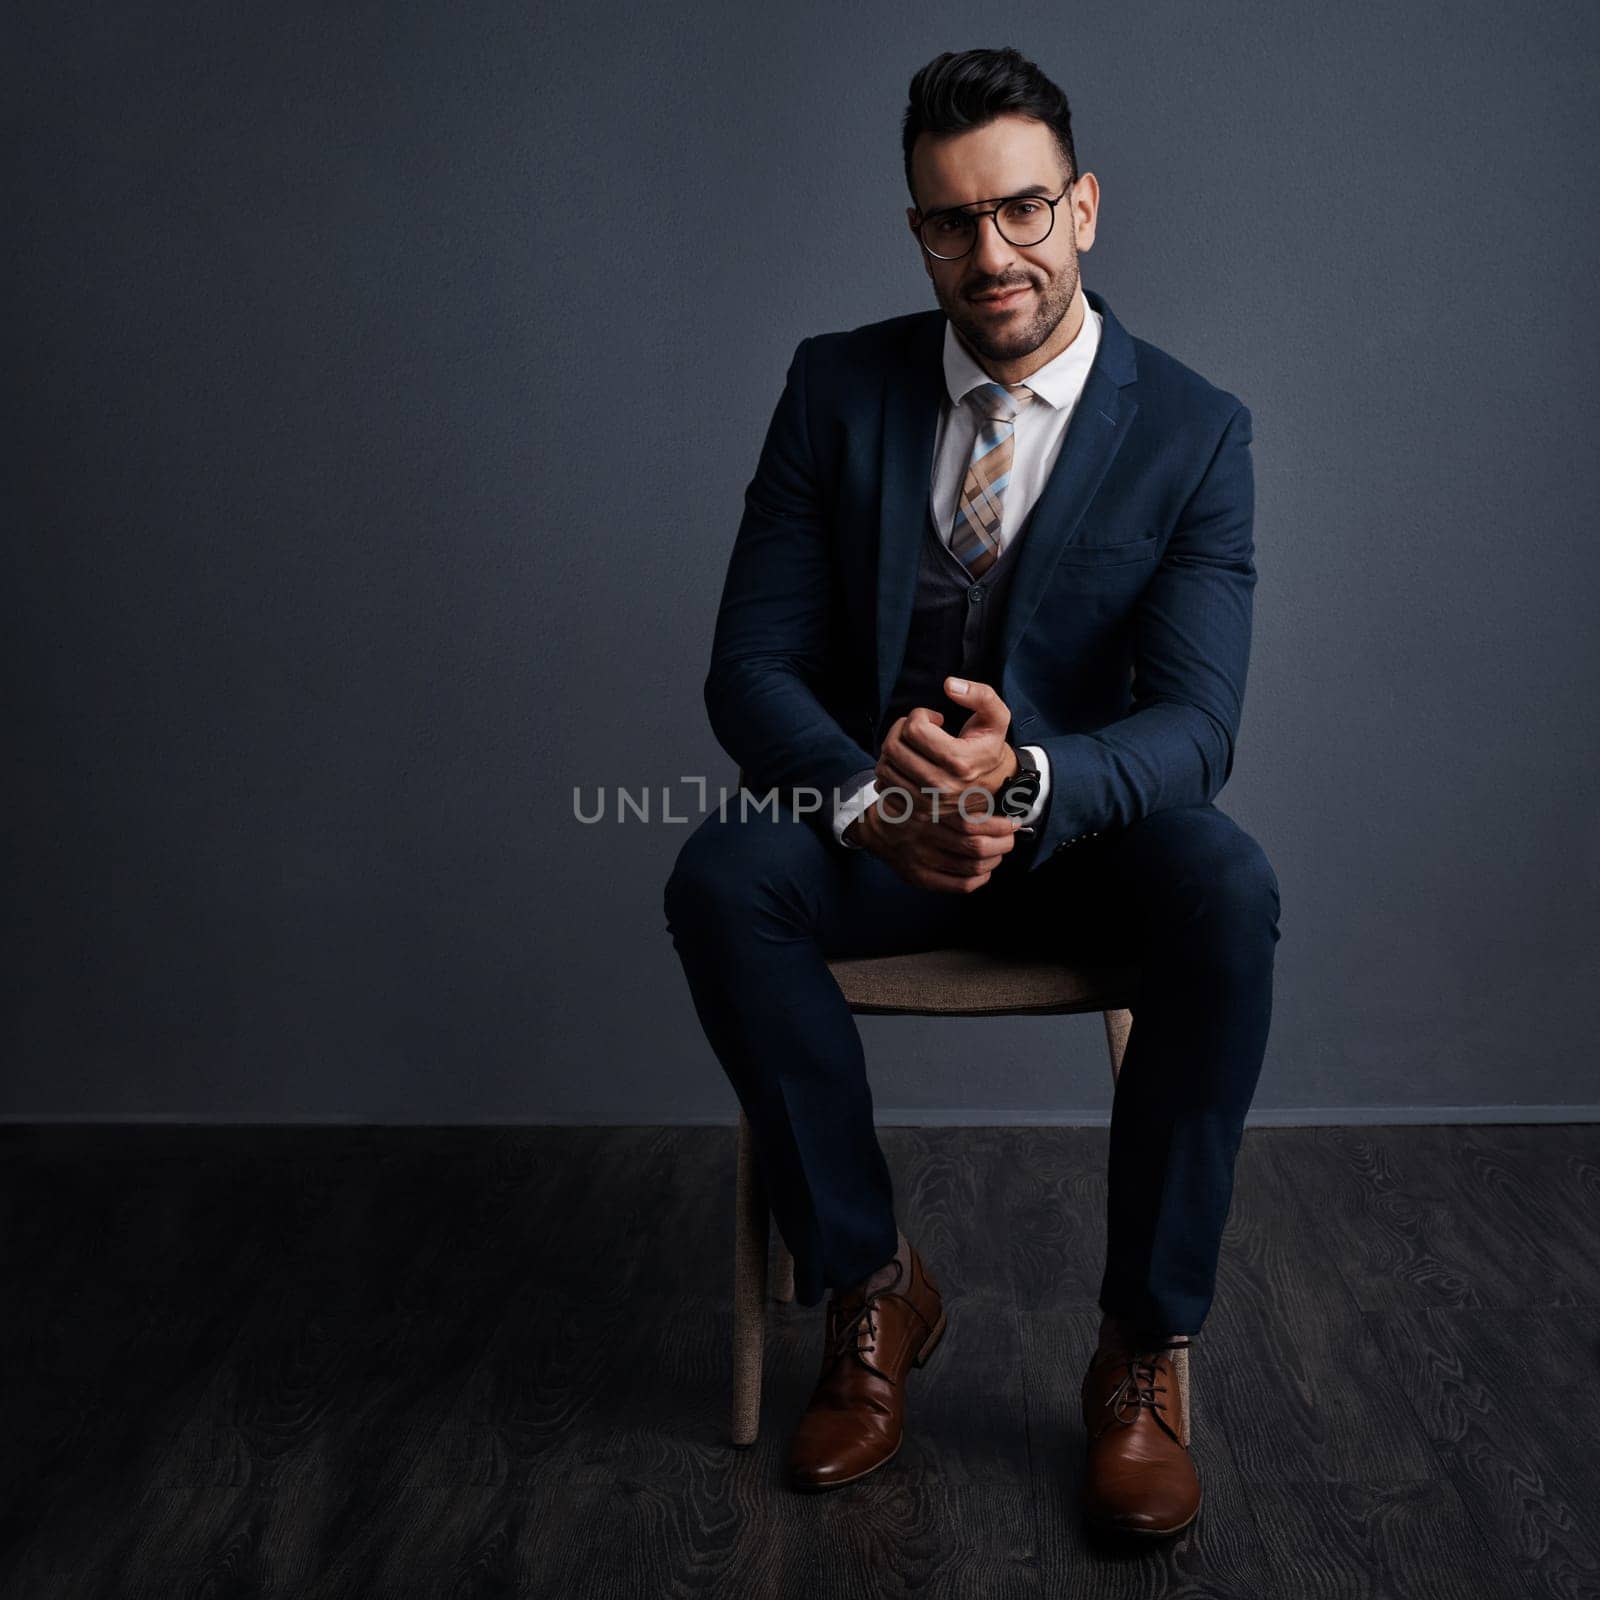 Style that inspires success. Studio shot of a stylish young businessman sitting on a chair against a gray background